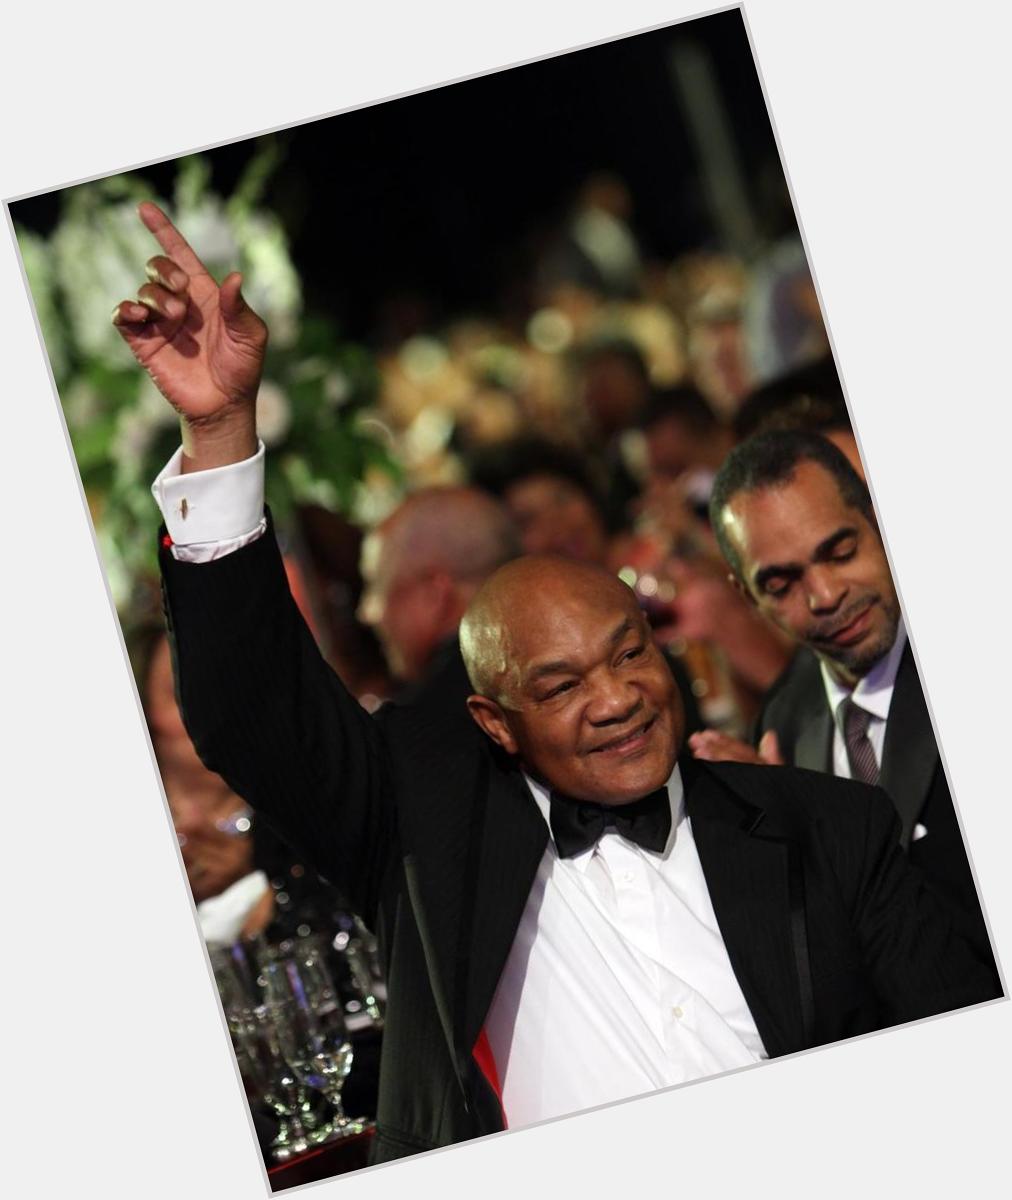 Happy Birthday two-time World Heavyweight Champion and Olympic gold medalist George Foreman!  